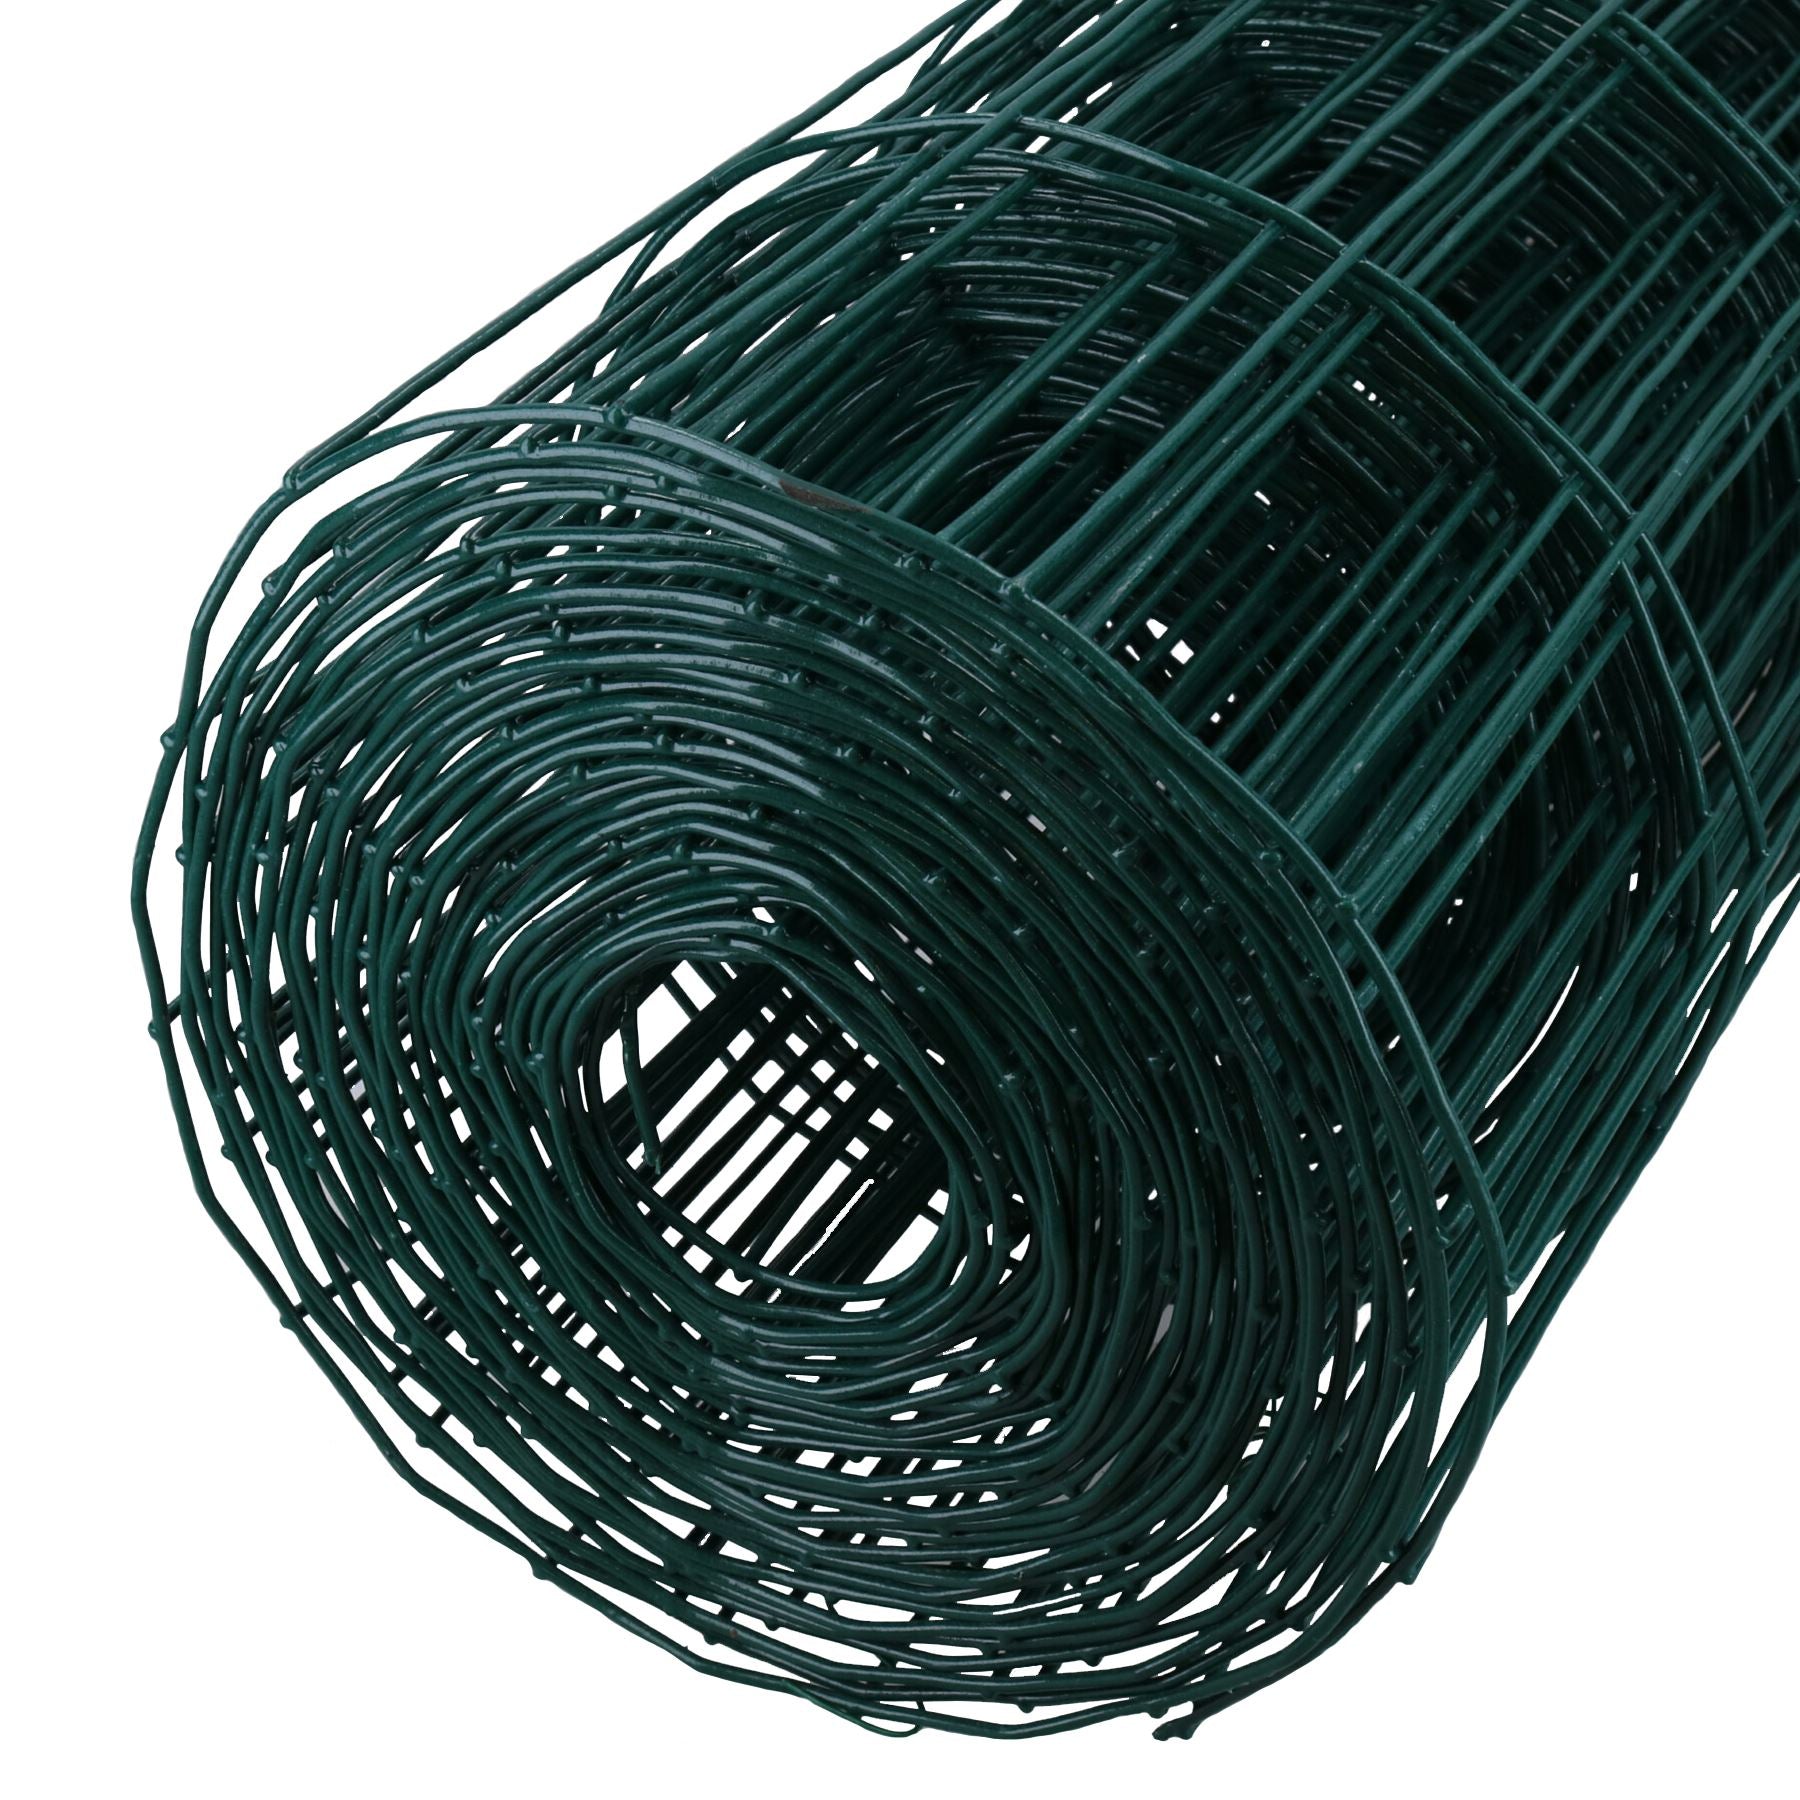 Green PVC Coated Steel Wire Garden Border Fence Netting Mesh 10m x 0.9m